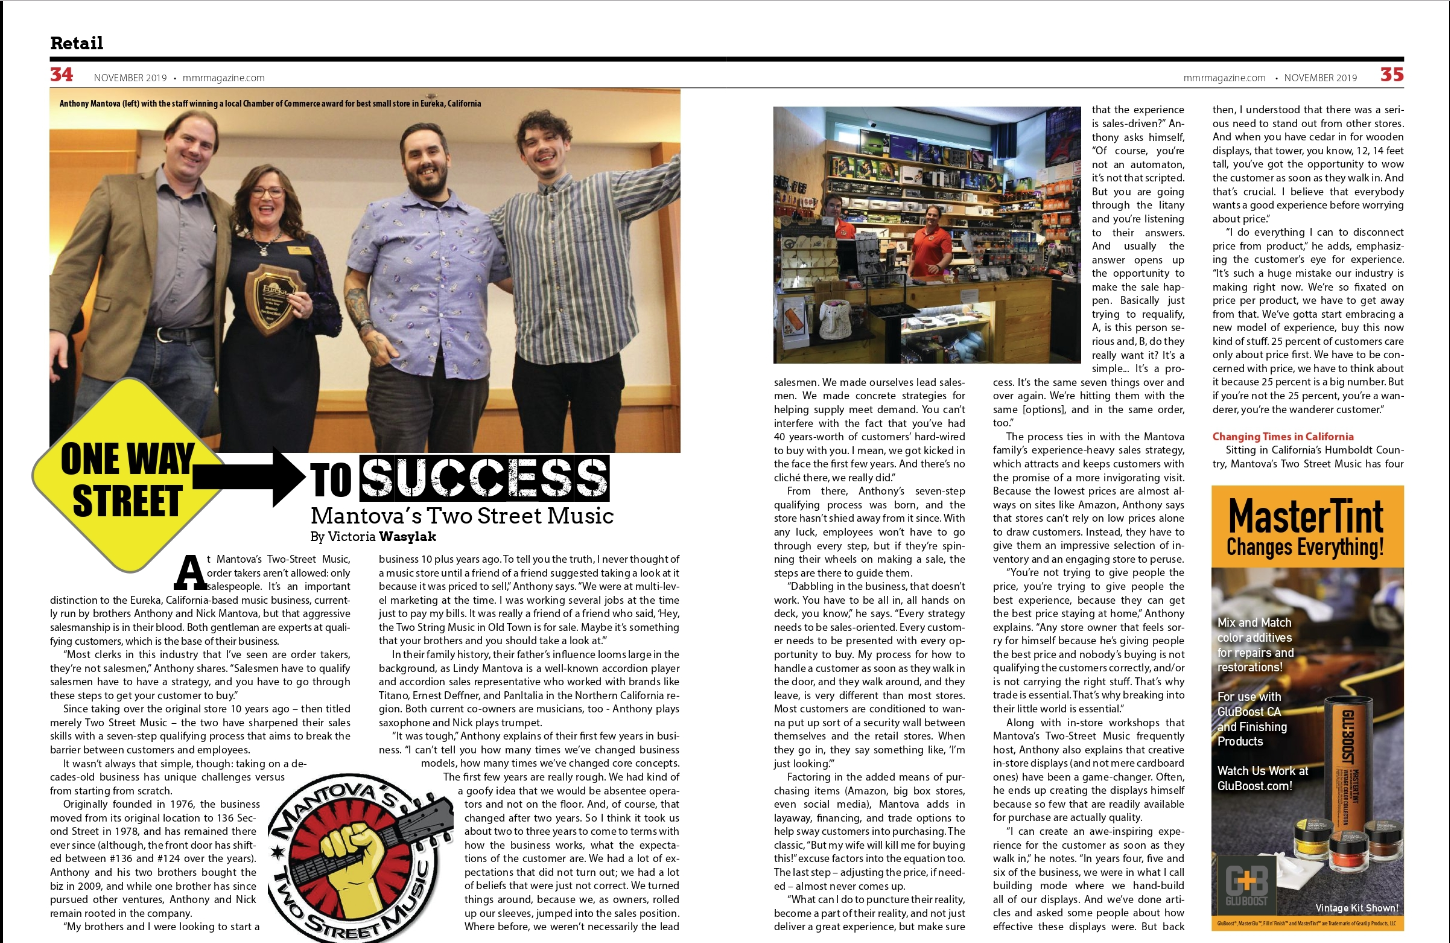 Special thanks to MMR Magazine for a retailer of MI business in Eureka 